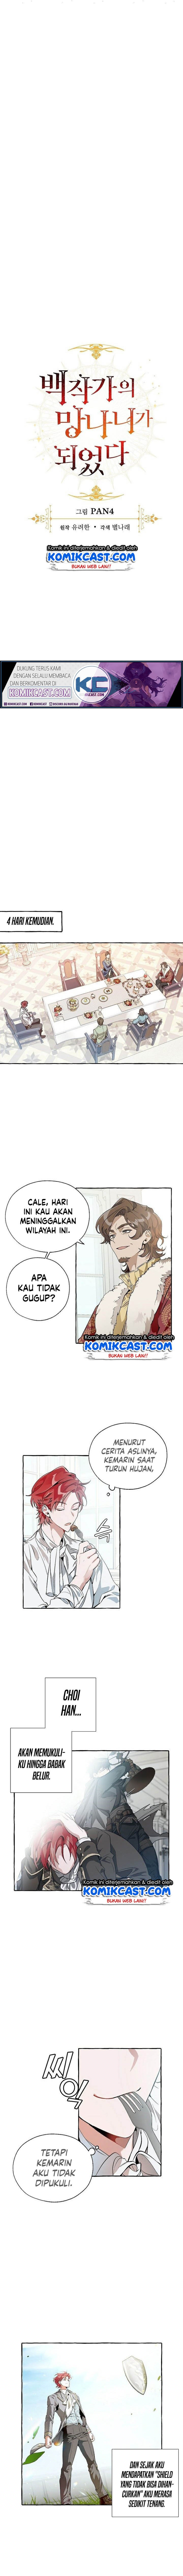 Lord Incheon Chapter 12 - 65